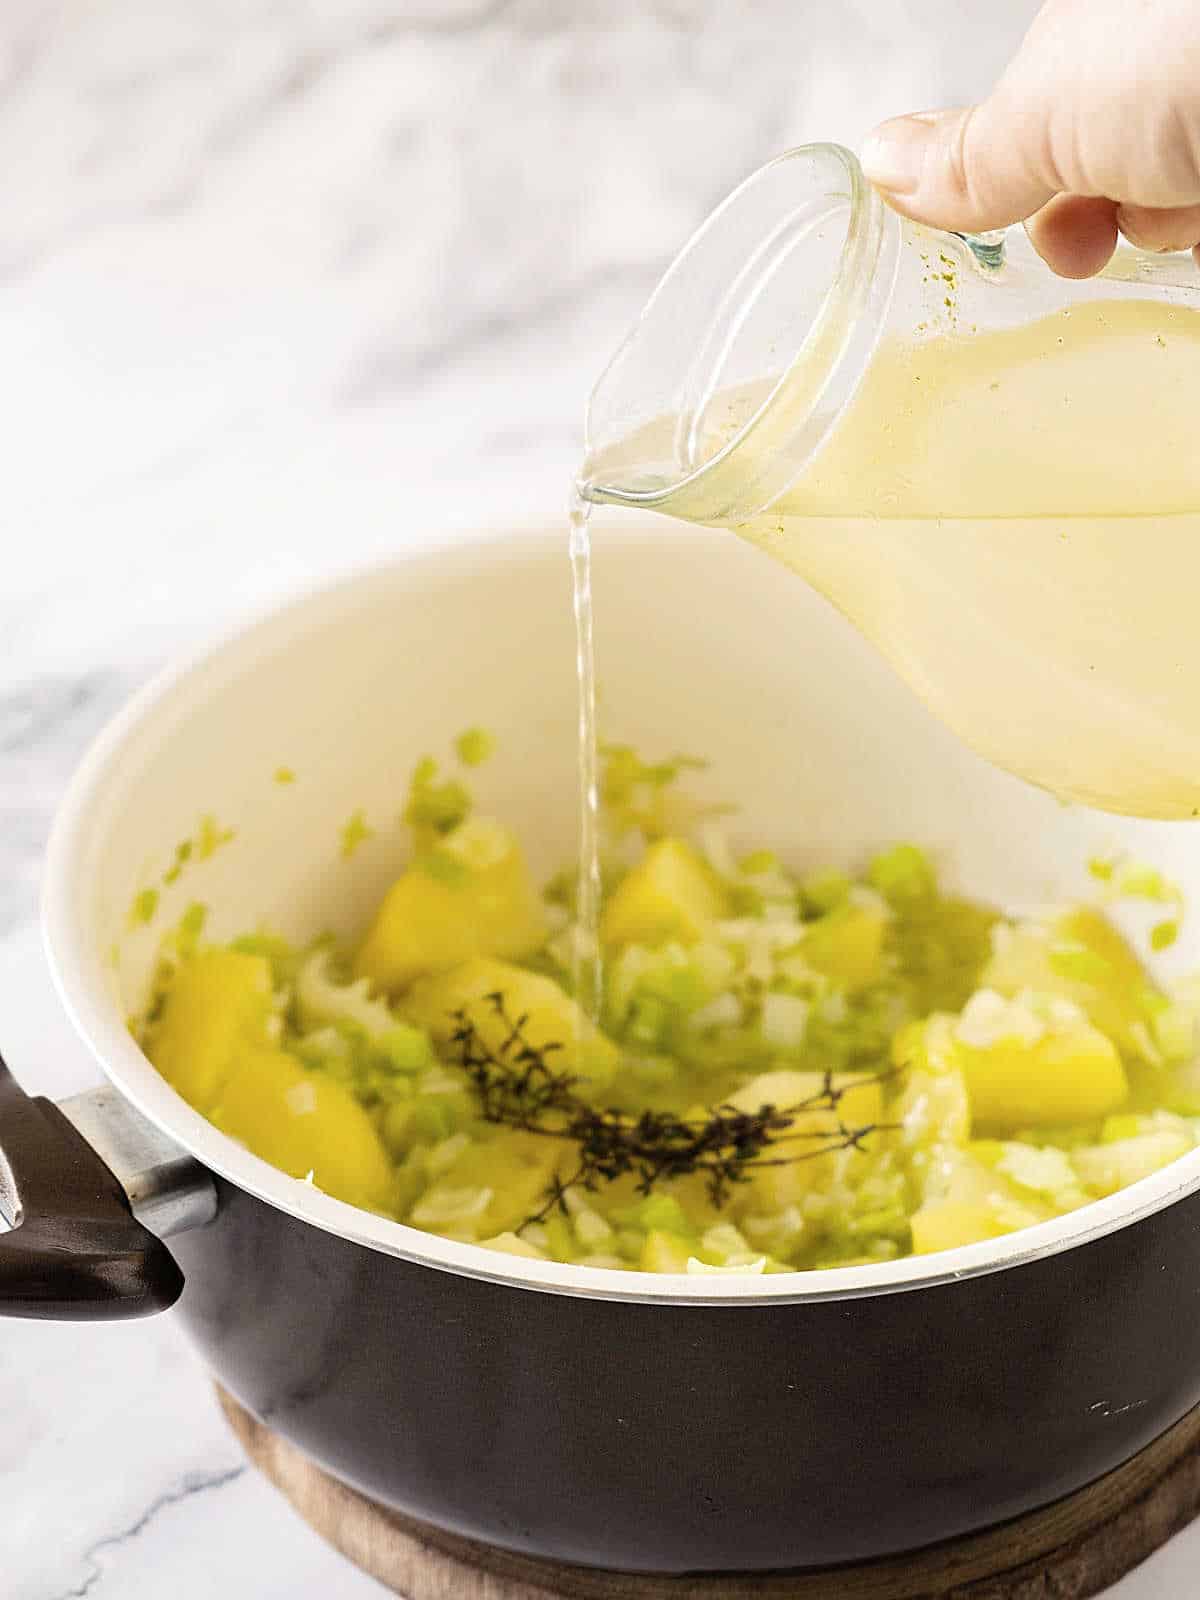 Adding broth from a jug to a pot with potatoes and leeks.